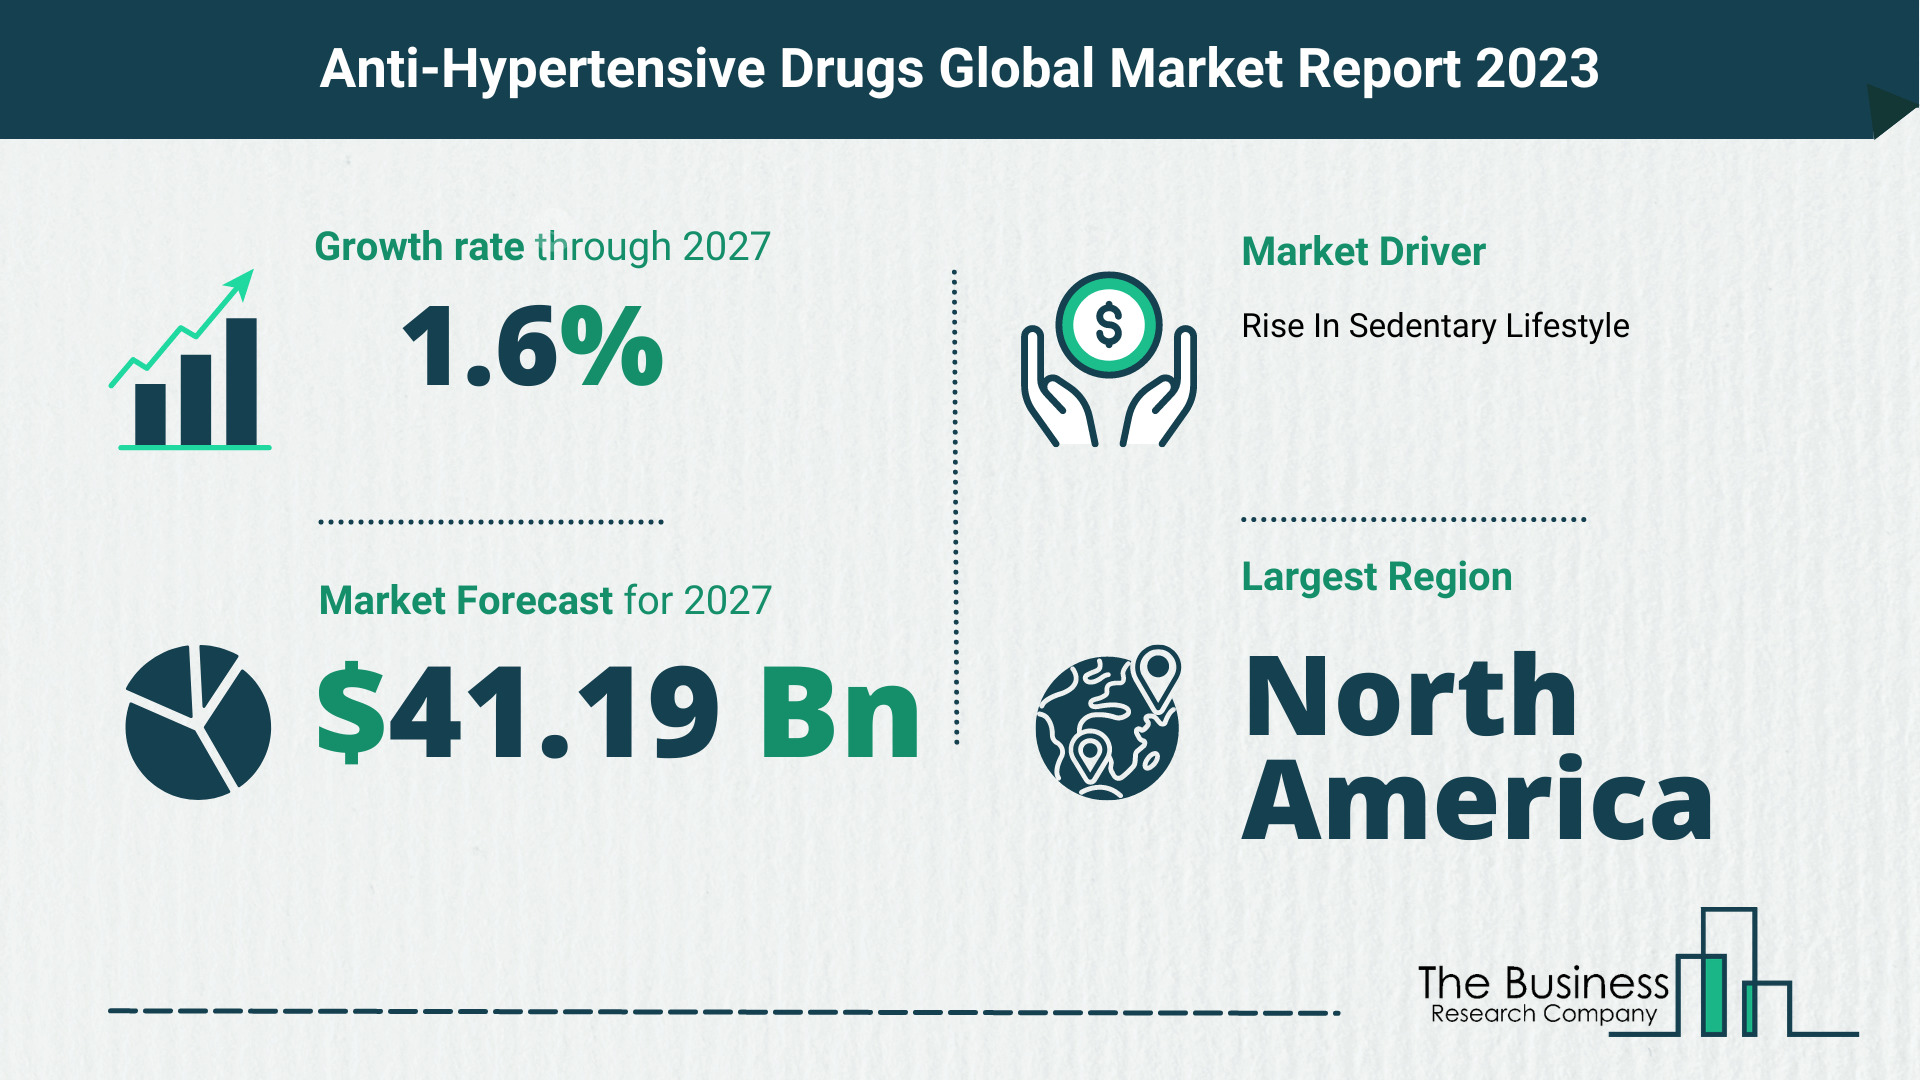 What Will The Anti-Hypertensive Drugs Market Look Like In 2023?